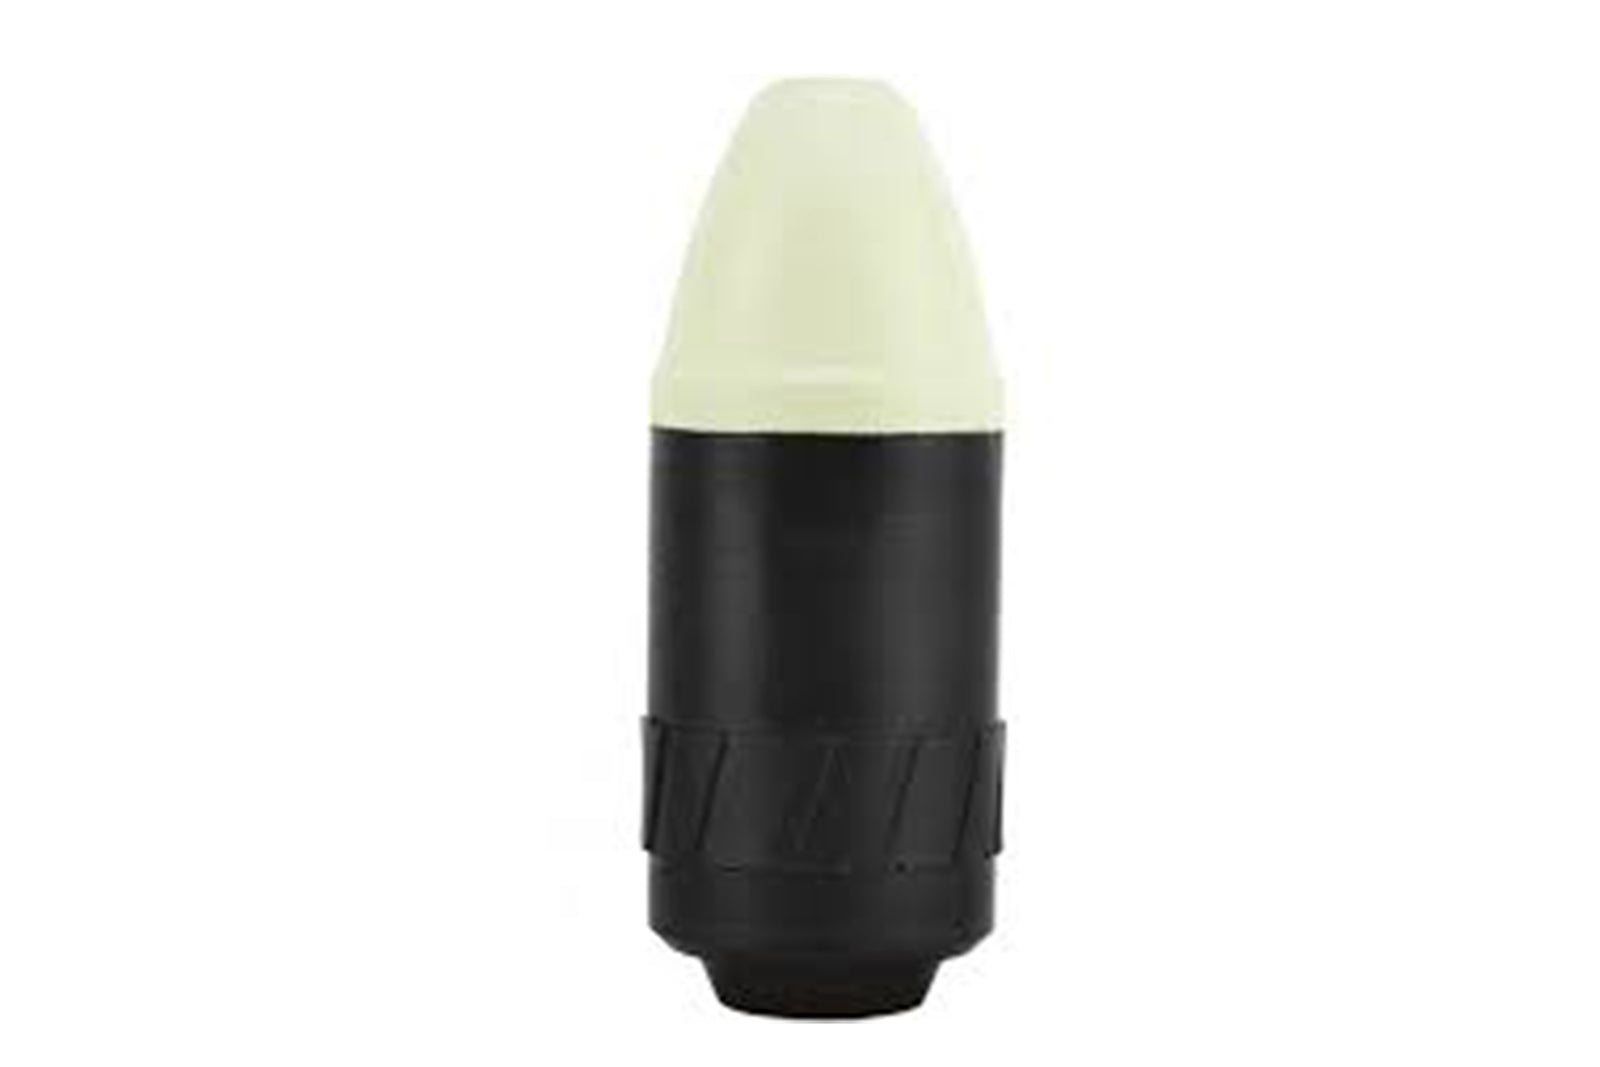 TAGINN Trainer Non-Marking Airsoft "Pecker" Dummy Projectile